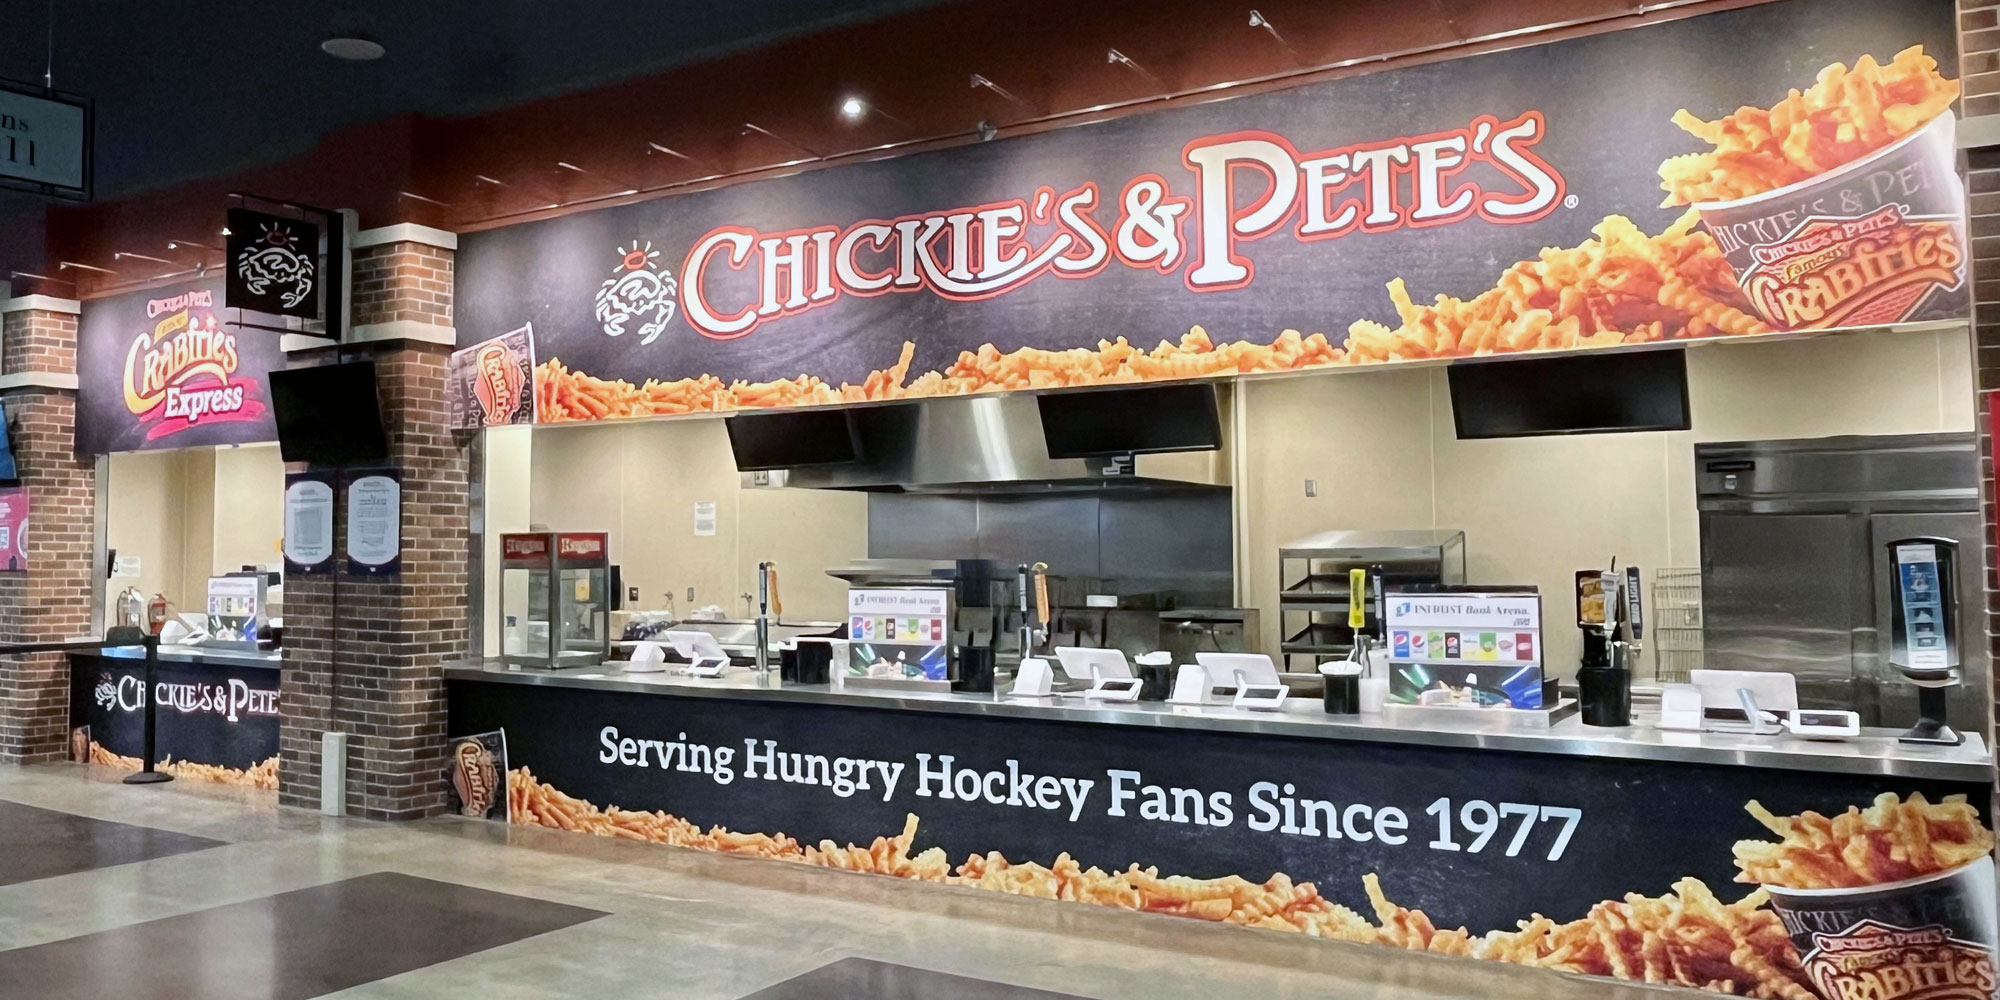 Let's Review Some Food at Intrust Bank Arena